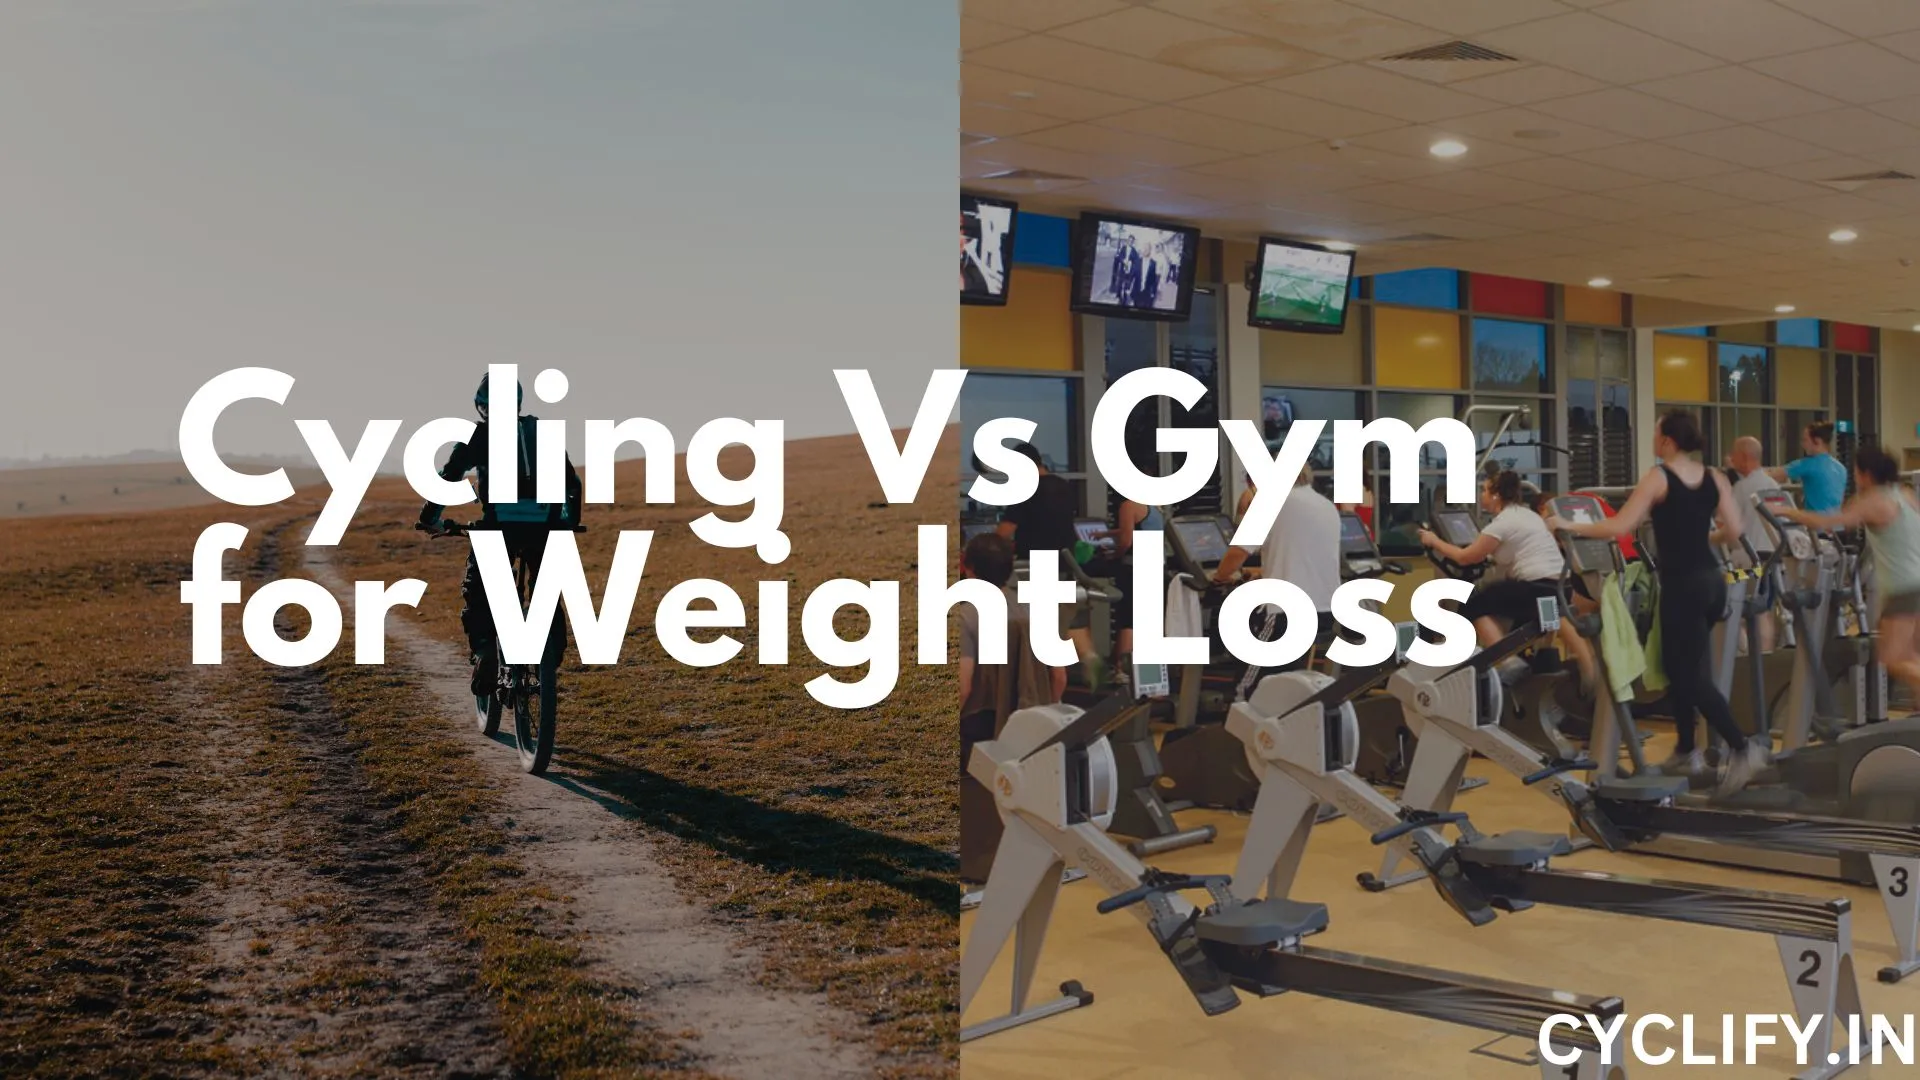 Cycling vs Gym for weight loss - A comparison between cycling and gym.